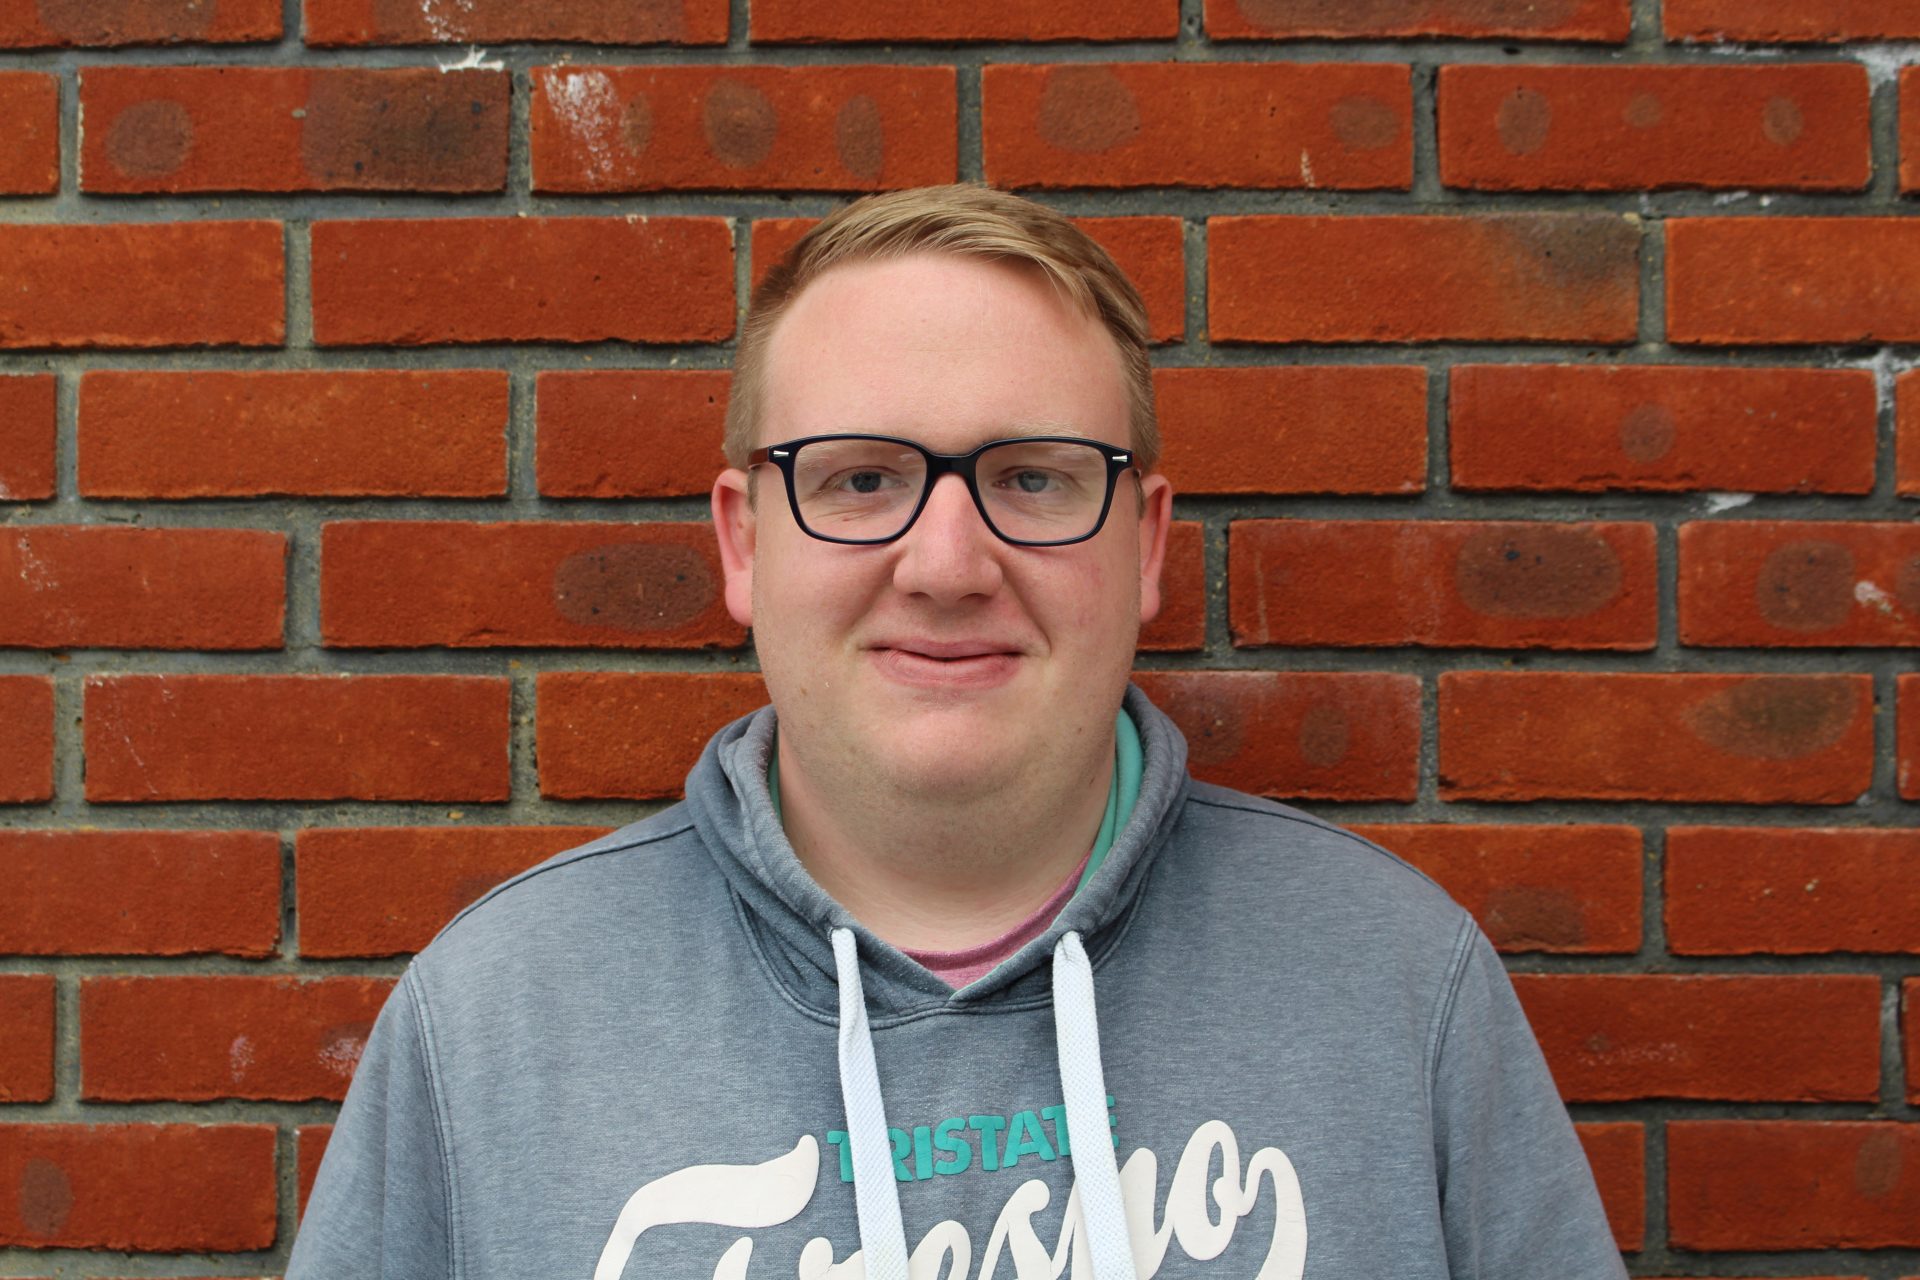 A man with short blond hair and dark glasses stands in front of a wall with a smile to the camera